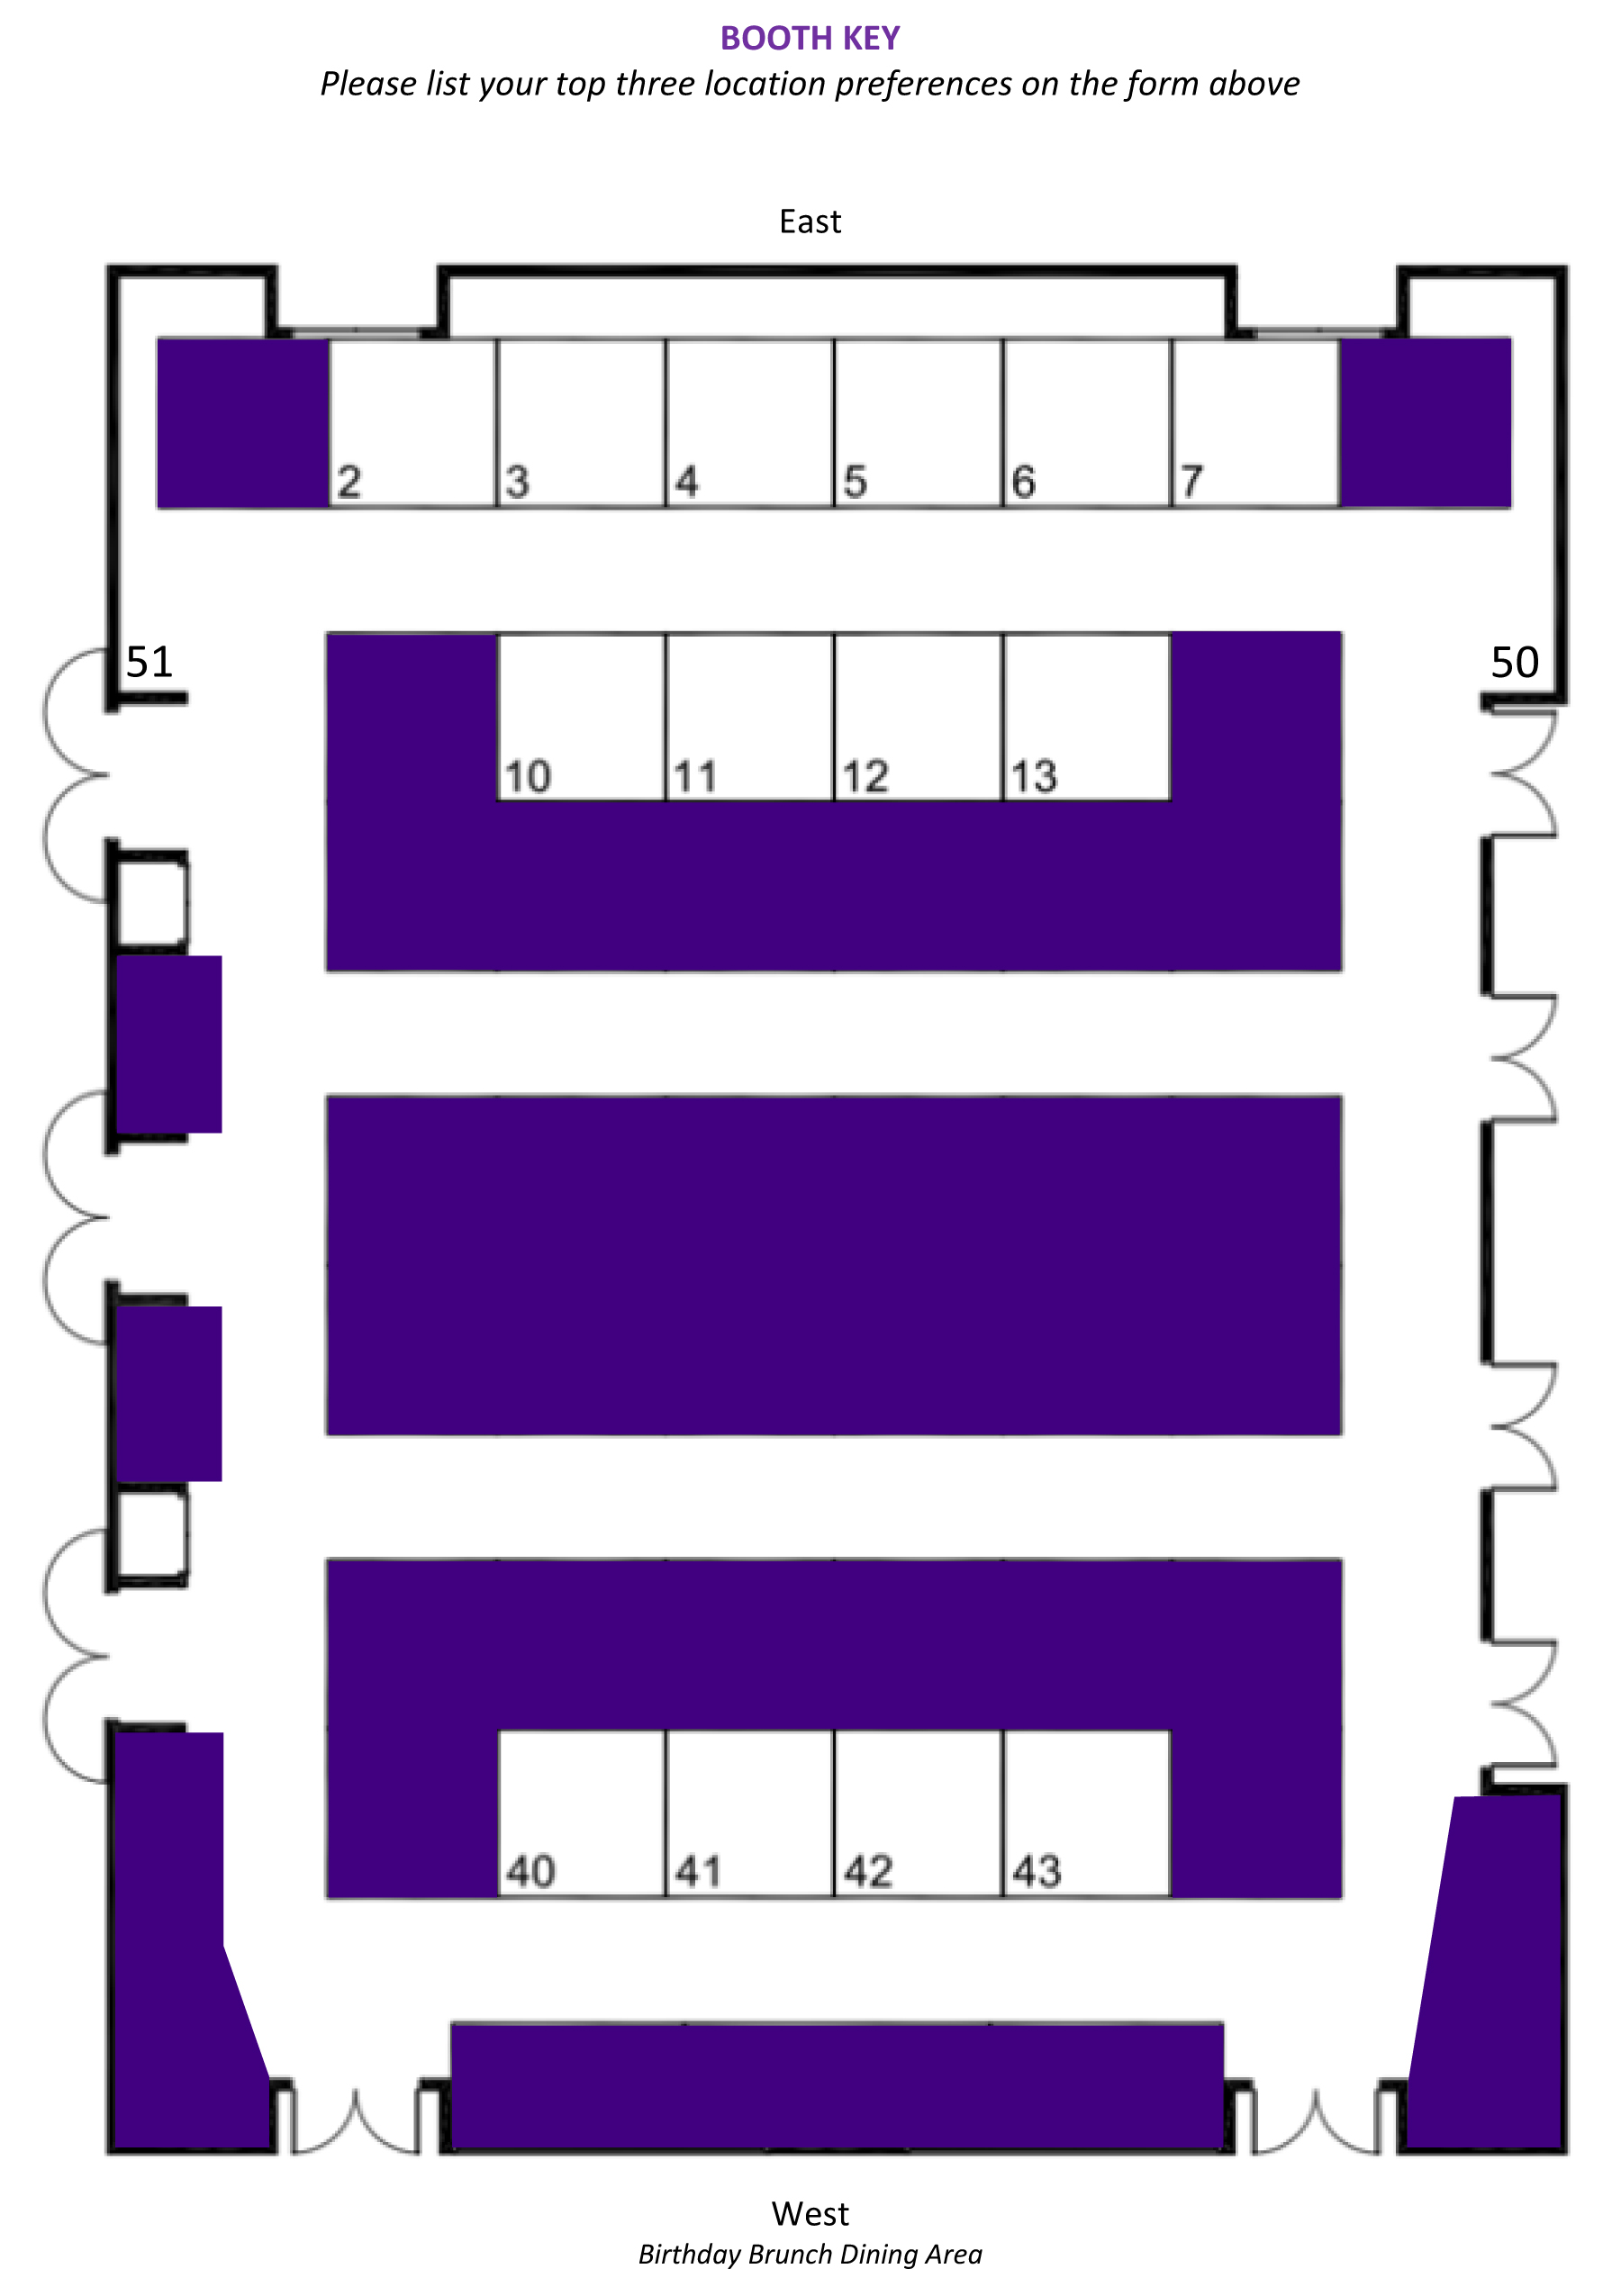 2022 Booth Map